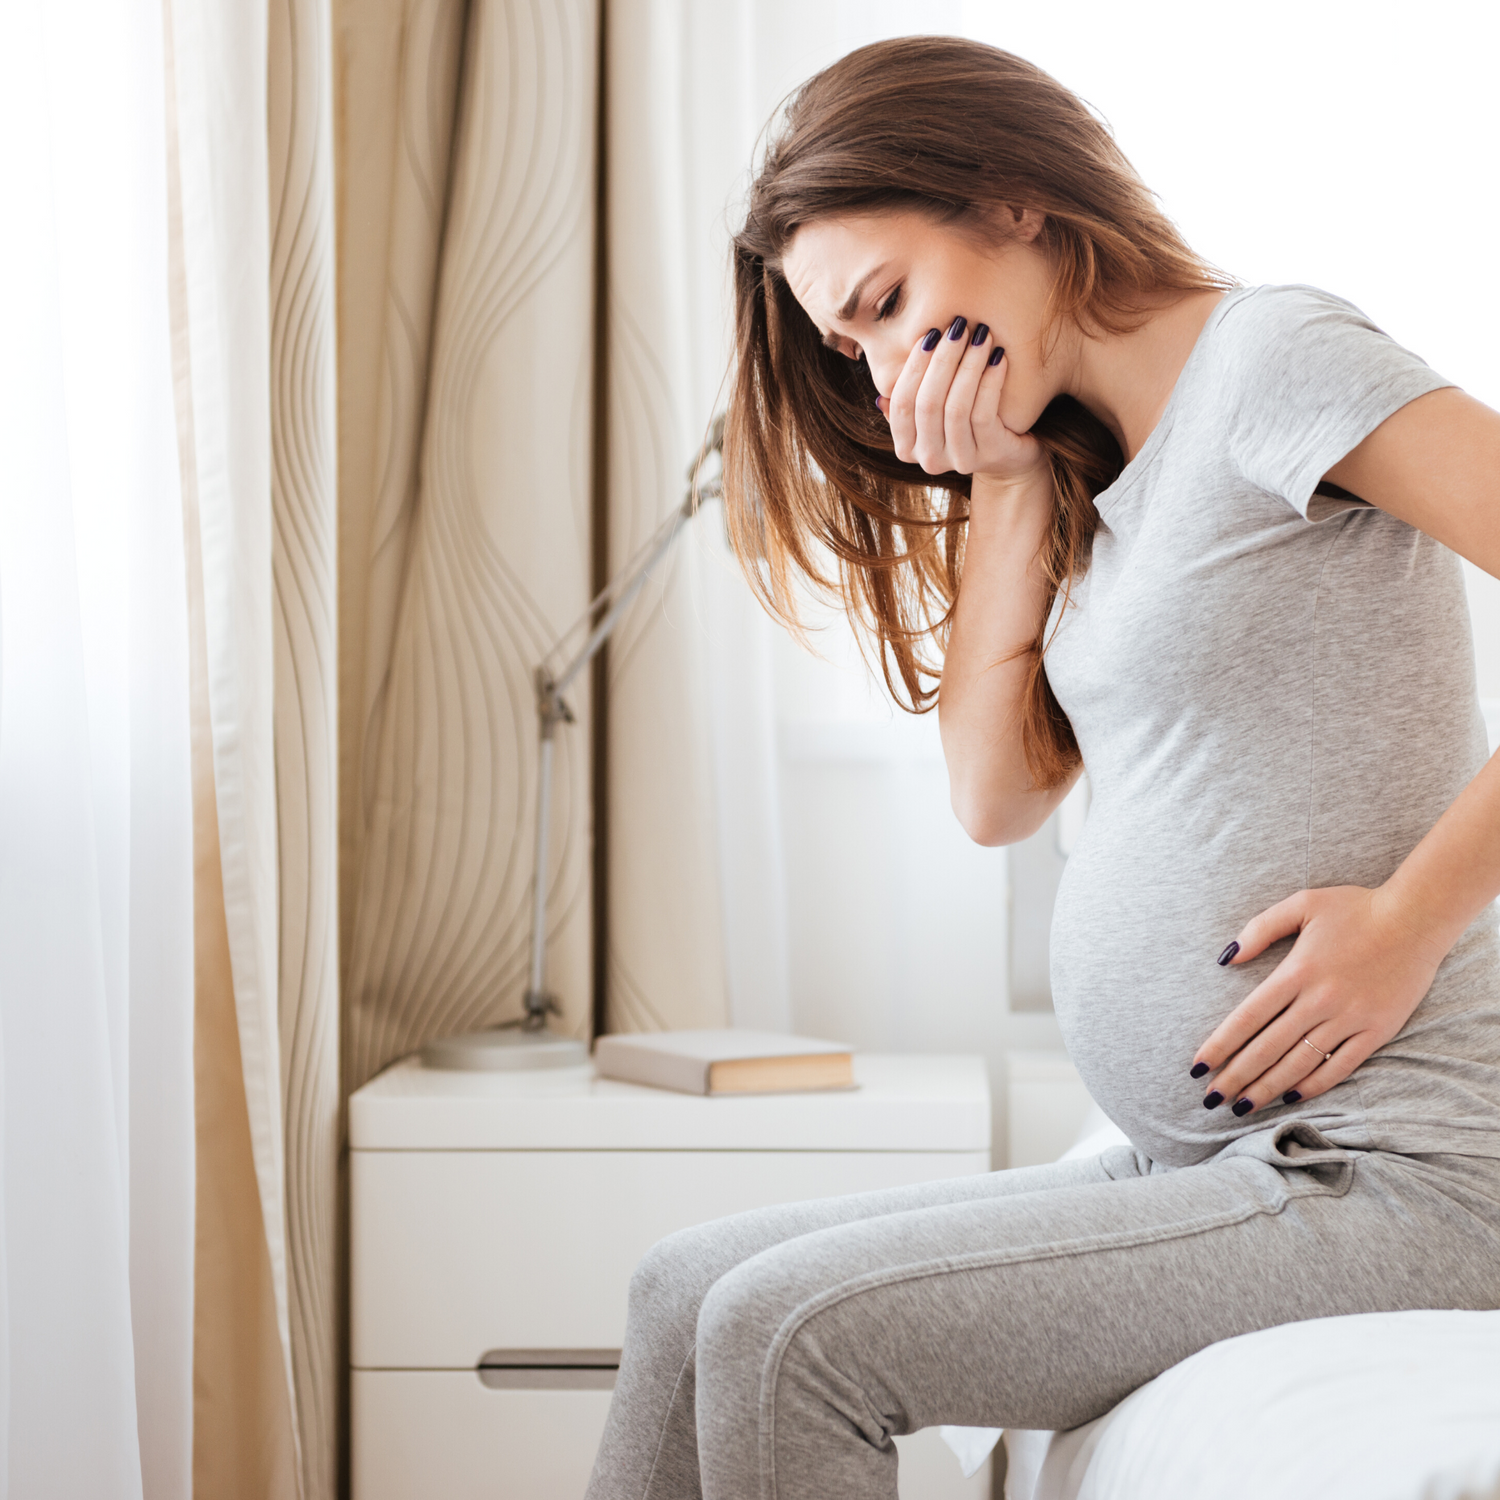 Managing Pregnancy Sickness: Simple Tips for Relief